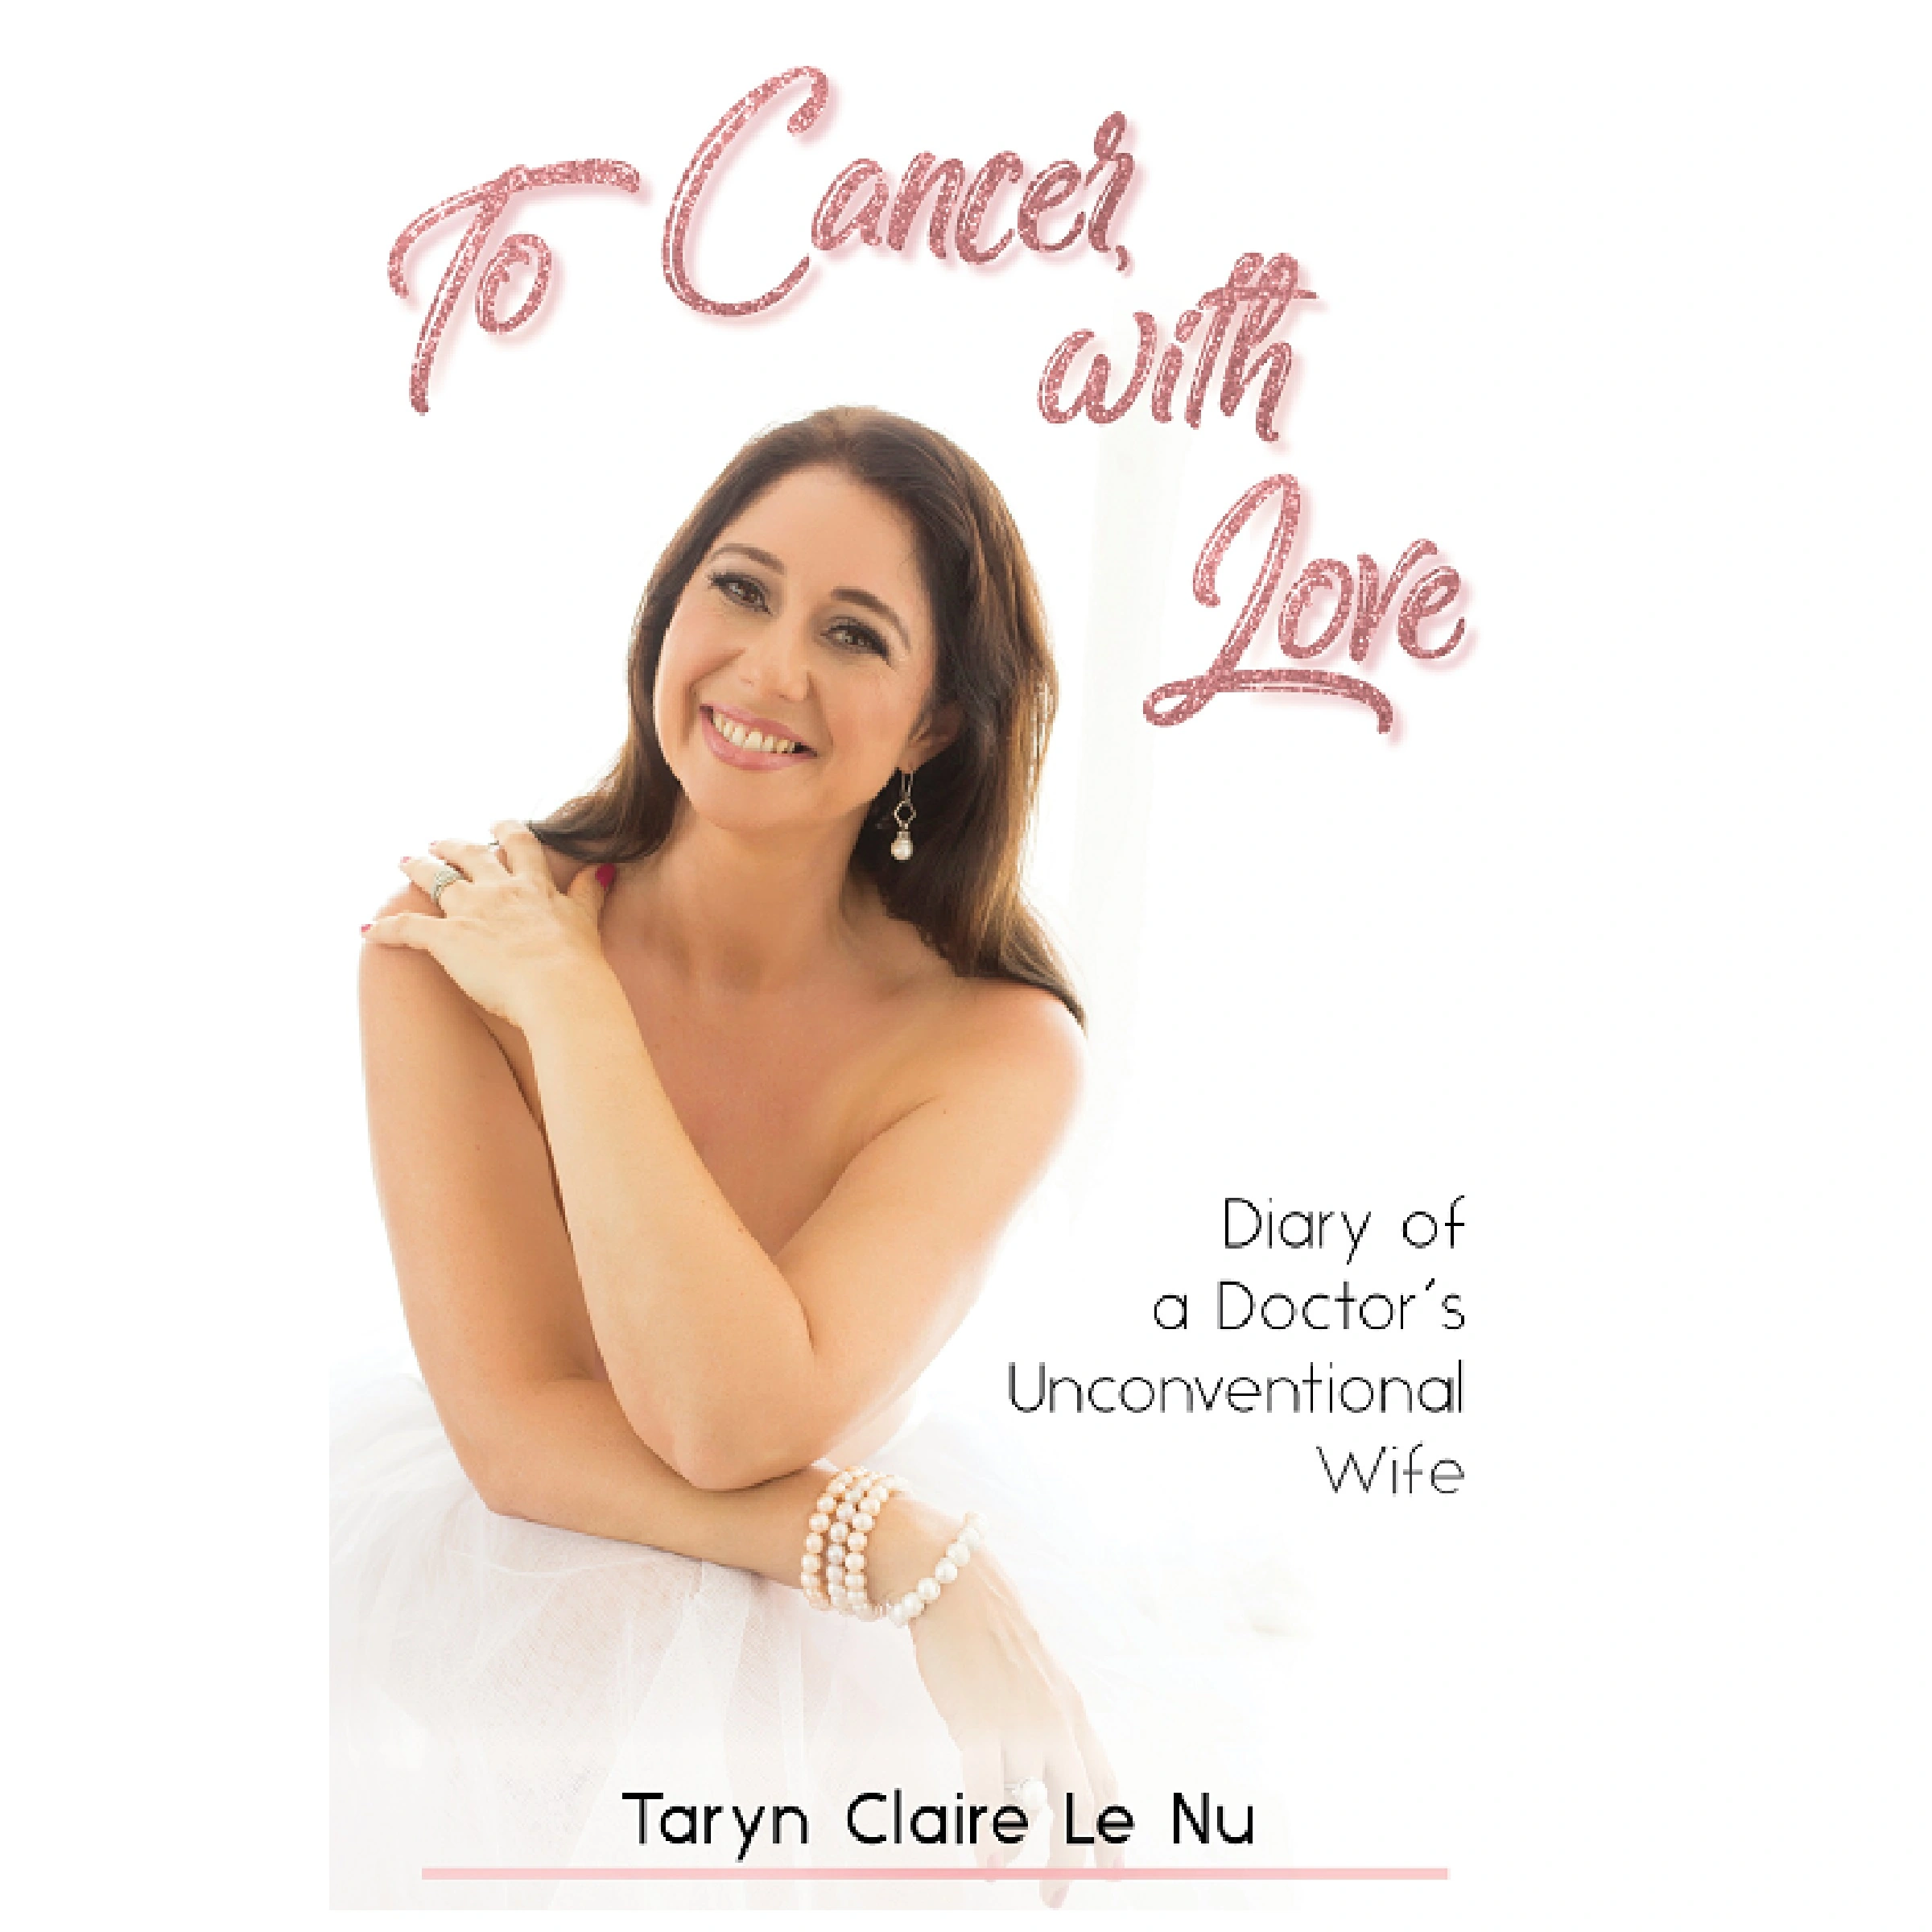 To Cancer with Love - Diary of a Doctor's Unconventional Wife Audiobook by Taryn Claire Le Nu